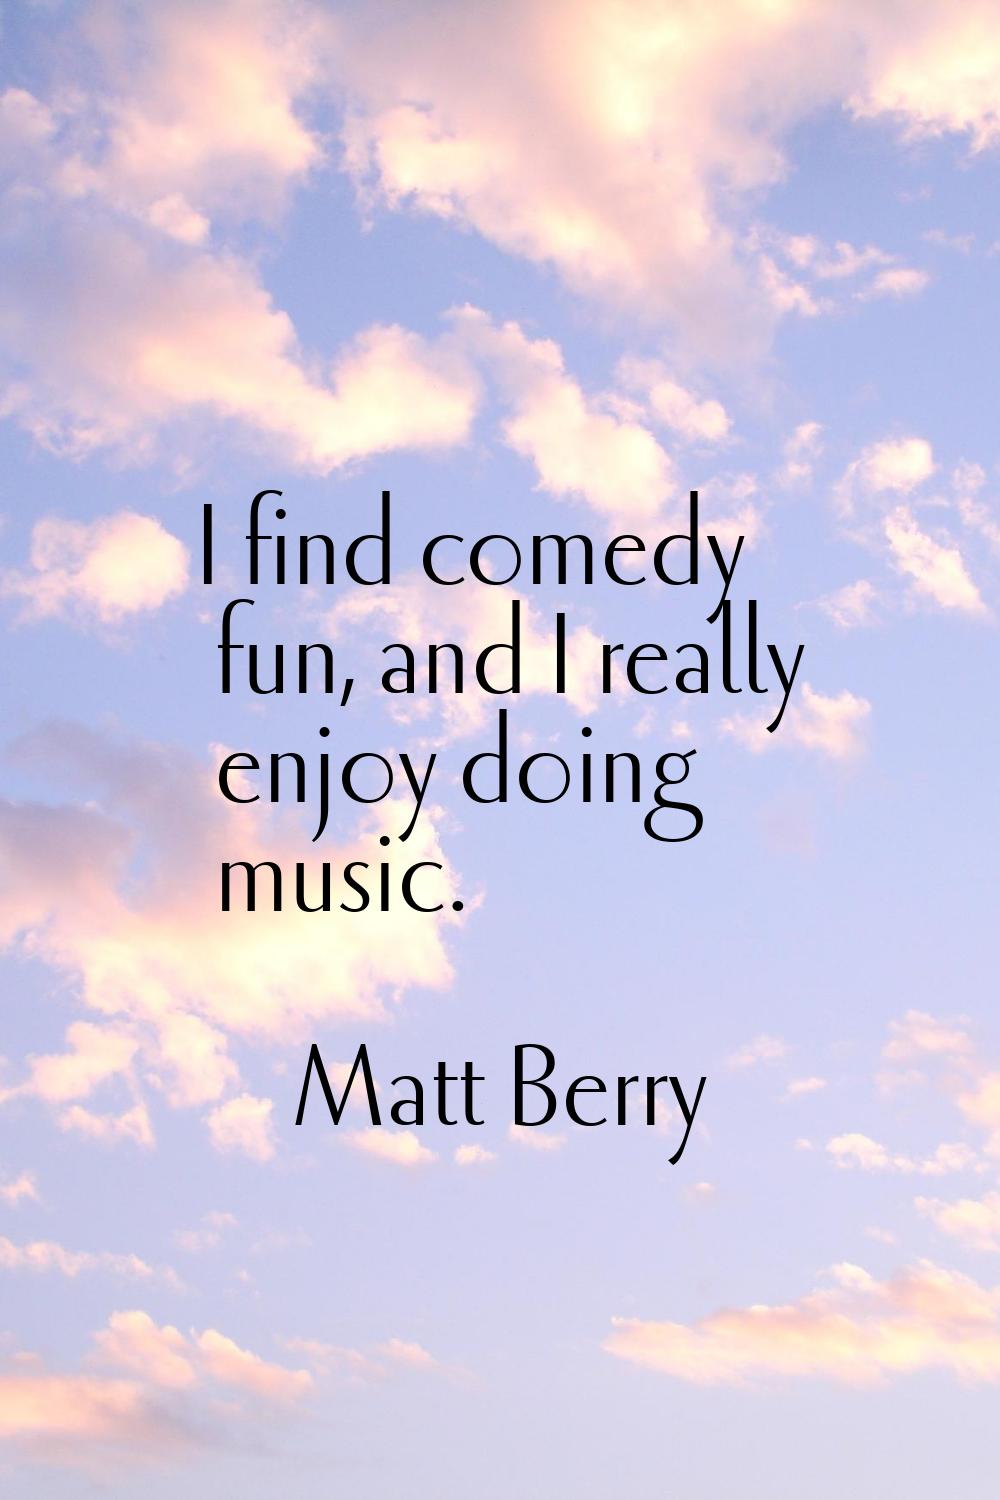 I find comedy fun, and I really enjoy doing music.